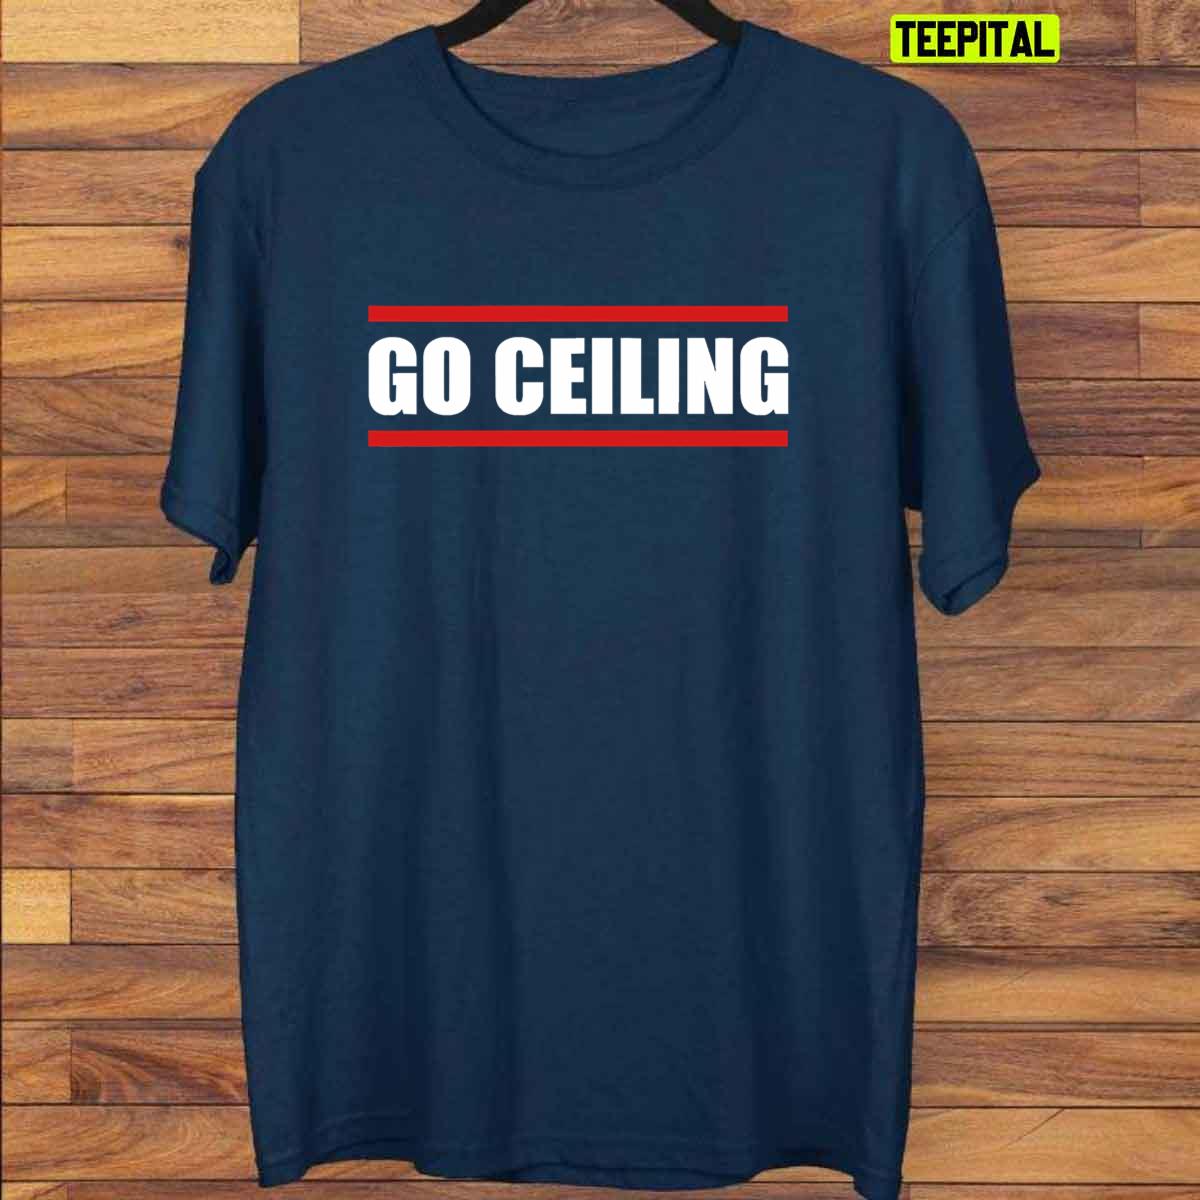 Let's Go Ceiling Funny T-Shirt